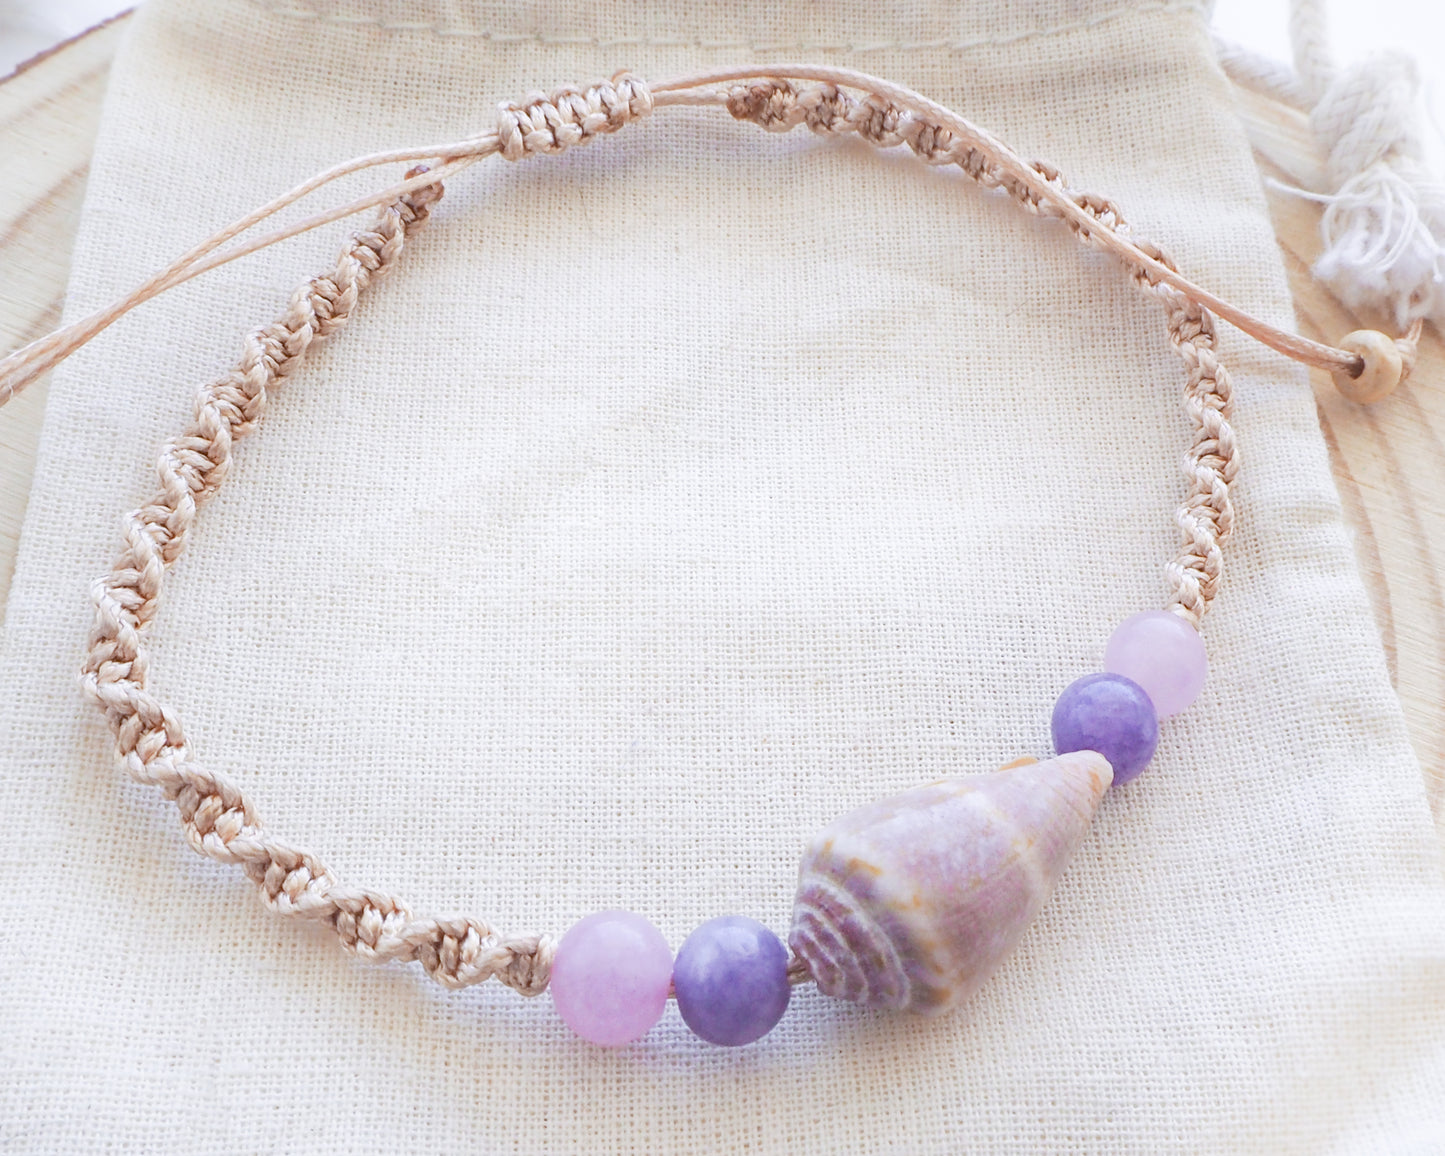 Real Mediterranean Cone Shell Bracelet with Amethyst and Rose Quartz Beads